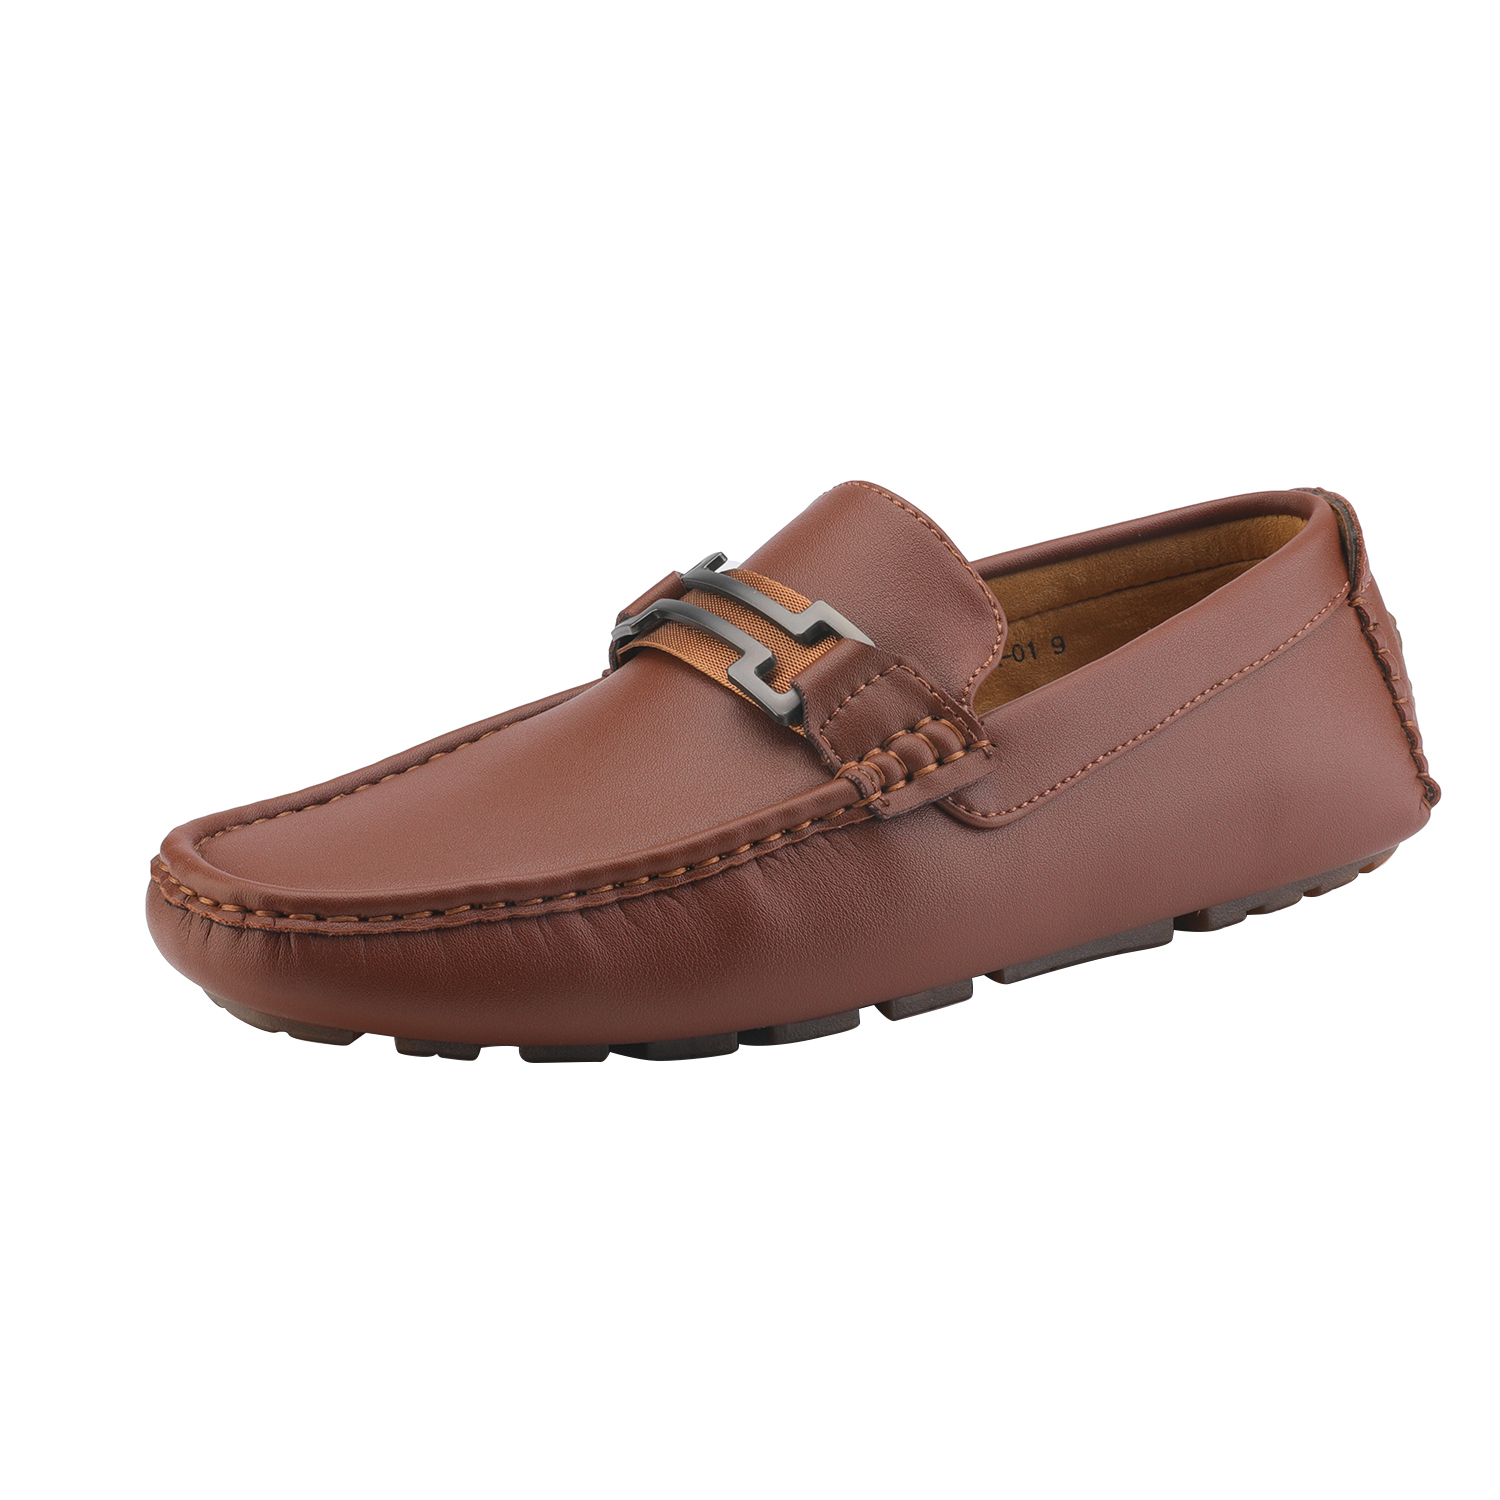 Bruno Marc Mens Comfort Casual Shoes Driving Penny Slip On Loafers Boat Shoes Hugh-01 Brown Size 9 - image 1 of 5